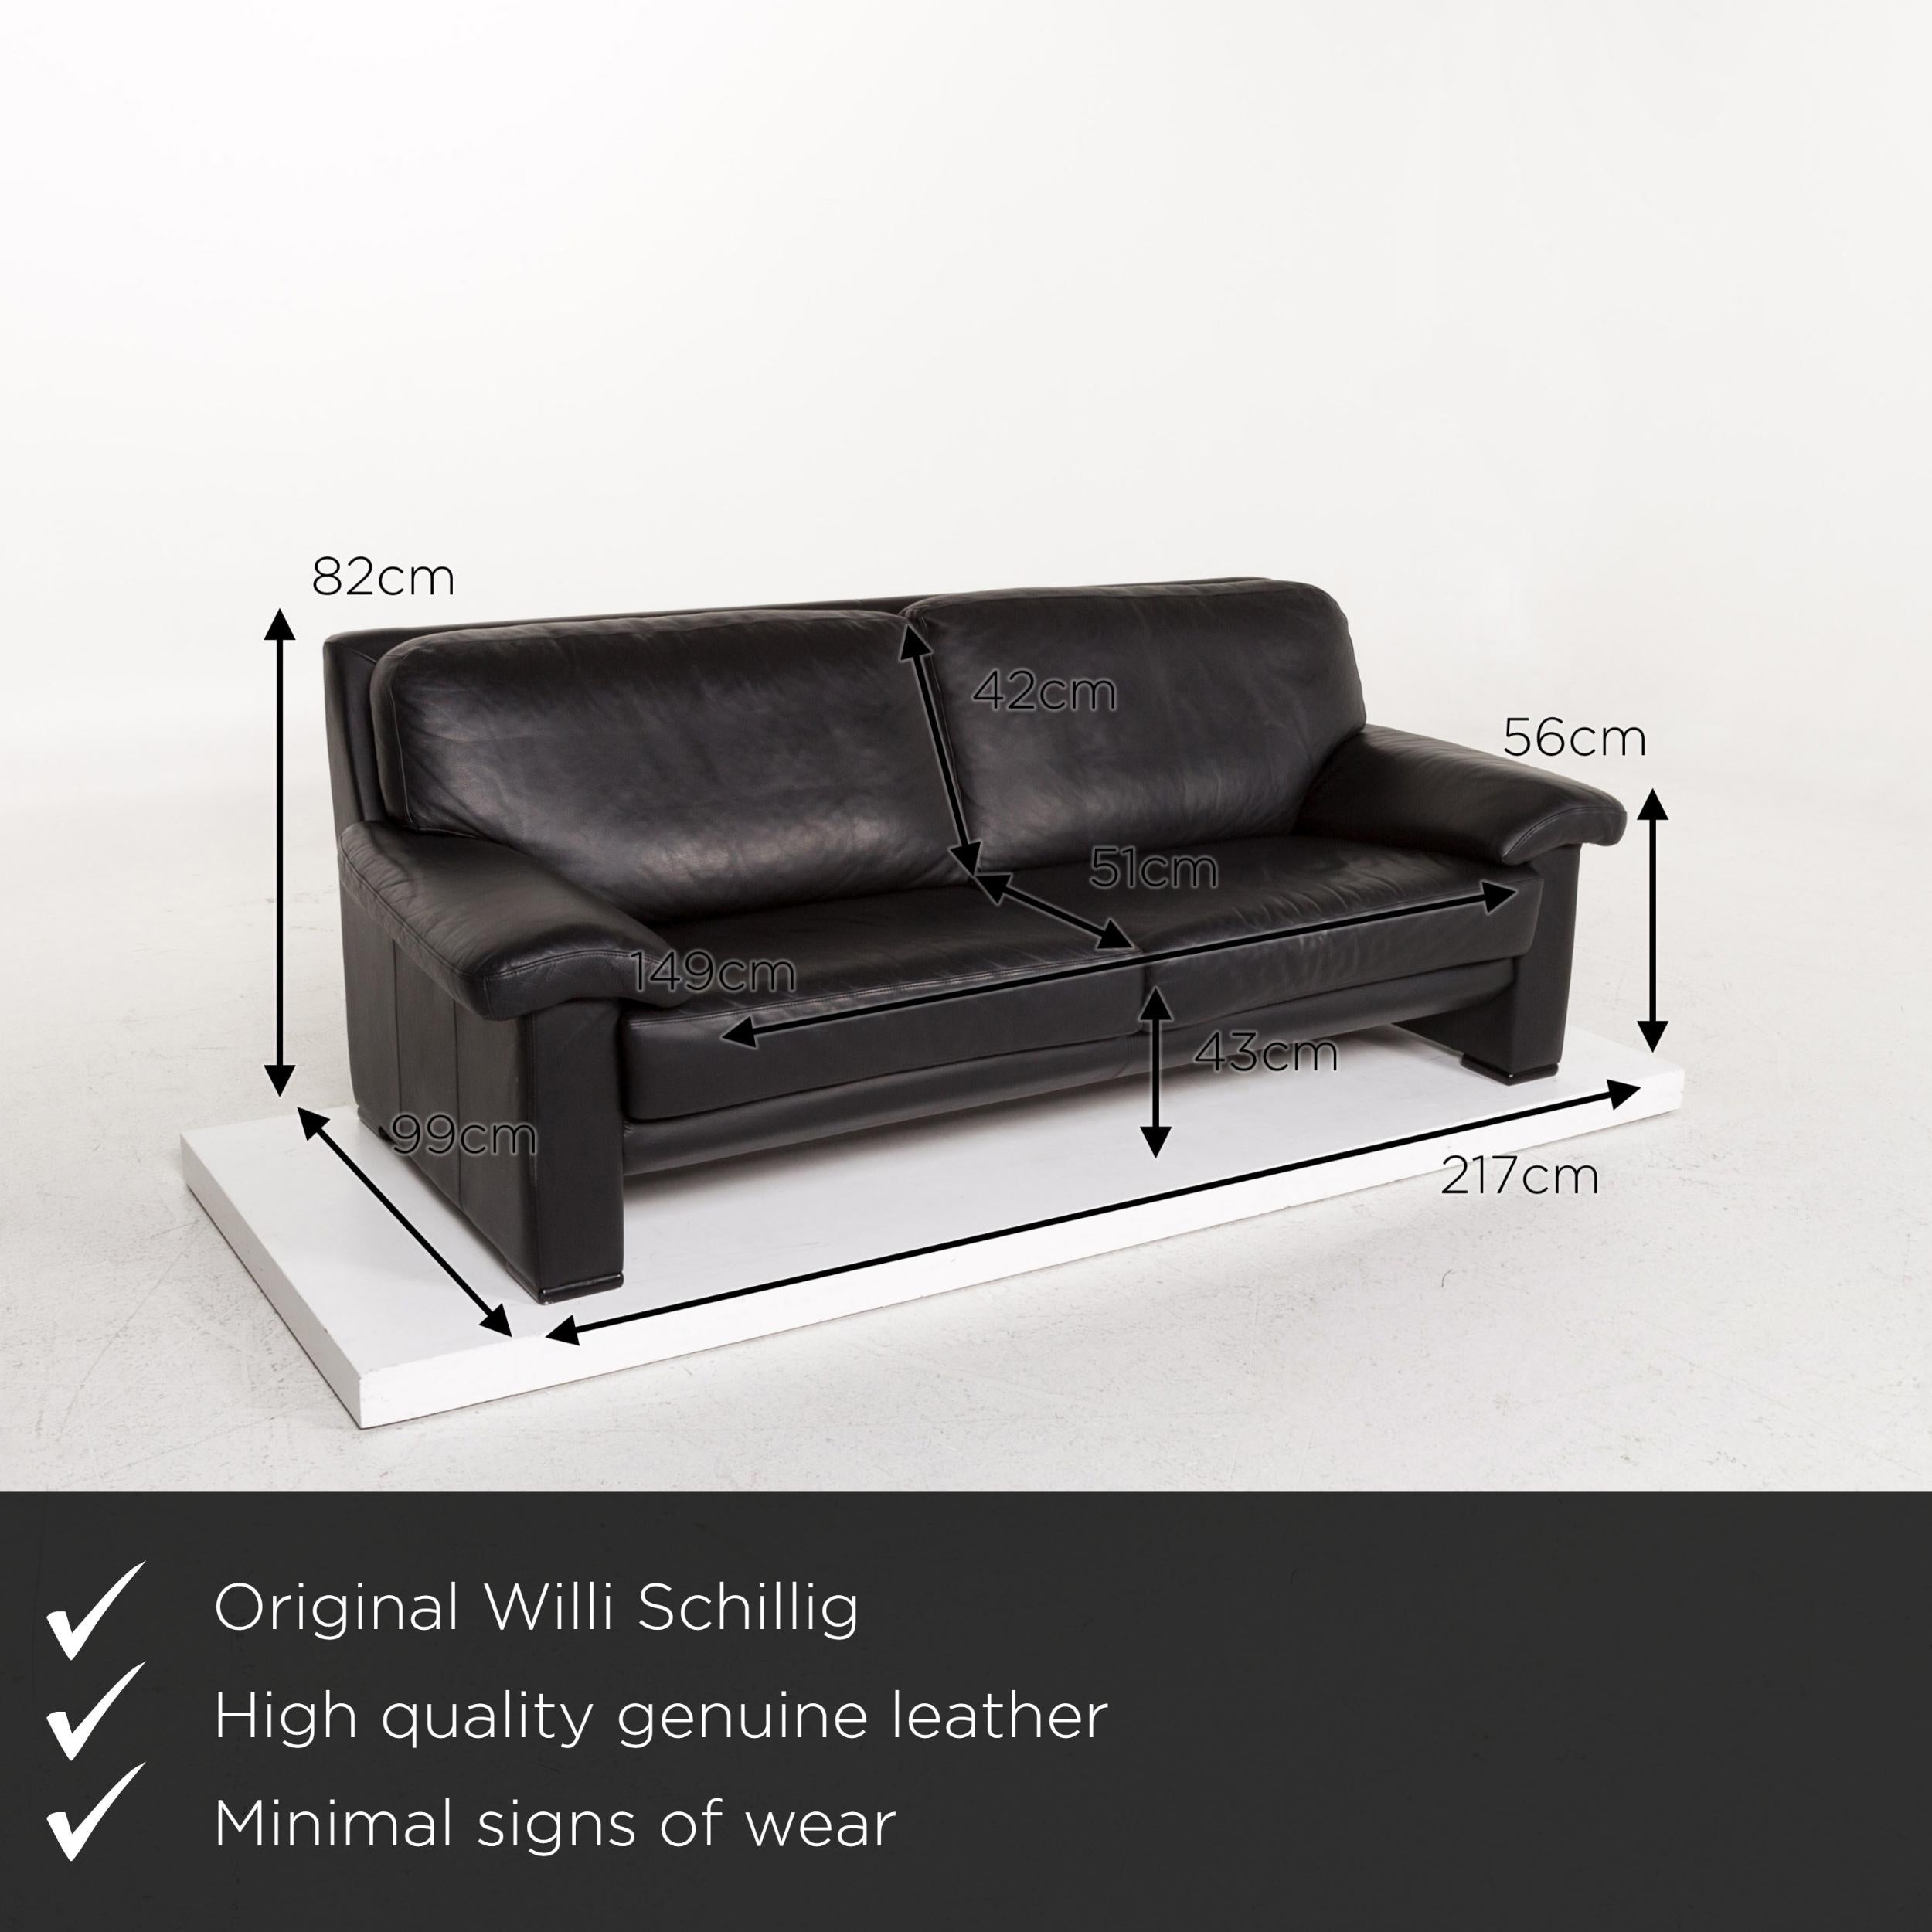 We present to you a Willi Schillig leather sofa black three-seat couch.
 

 Product measurements in centimeters:
 

Depth 99
Width 217
Height 82
Seat height 43
Rest height 56
Seat depth 51
Seat width 149
Back height 42.
 